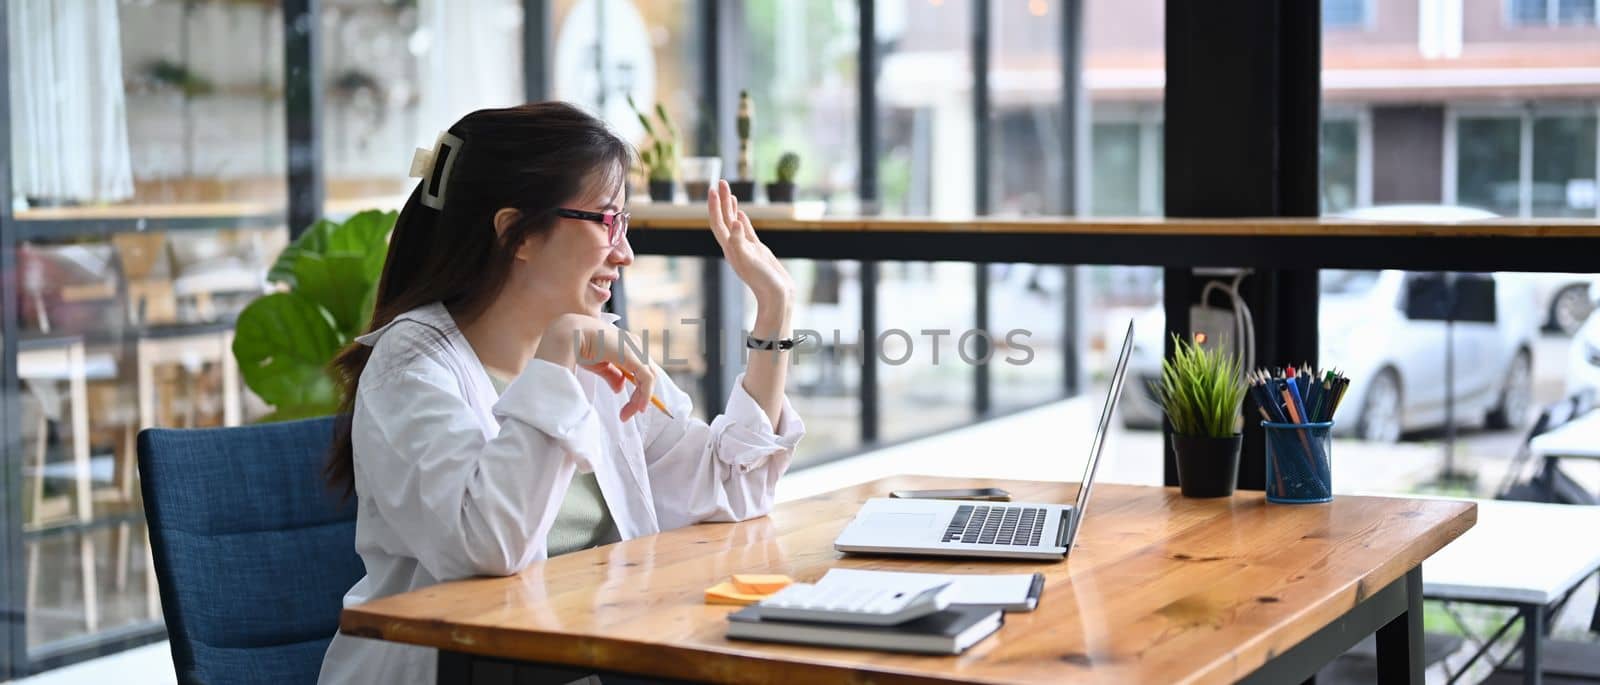 Smiling woman having video call on laptop computer.